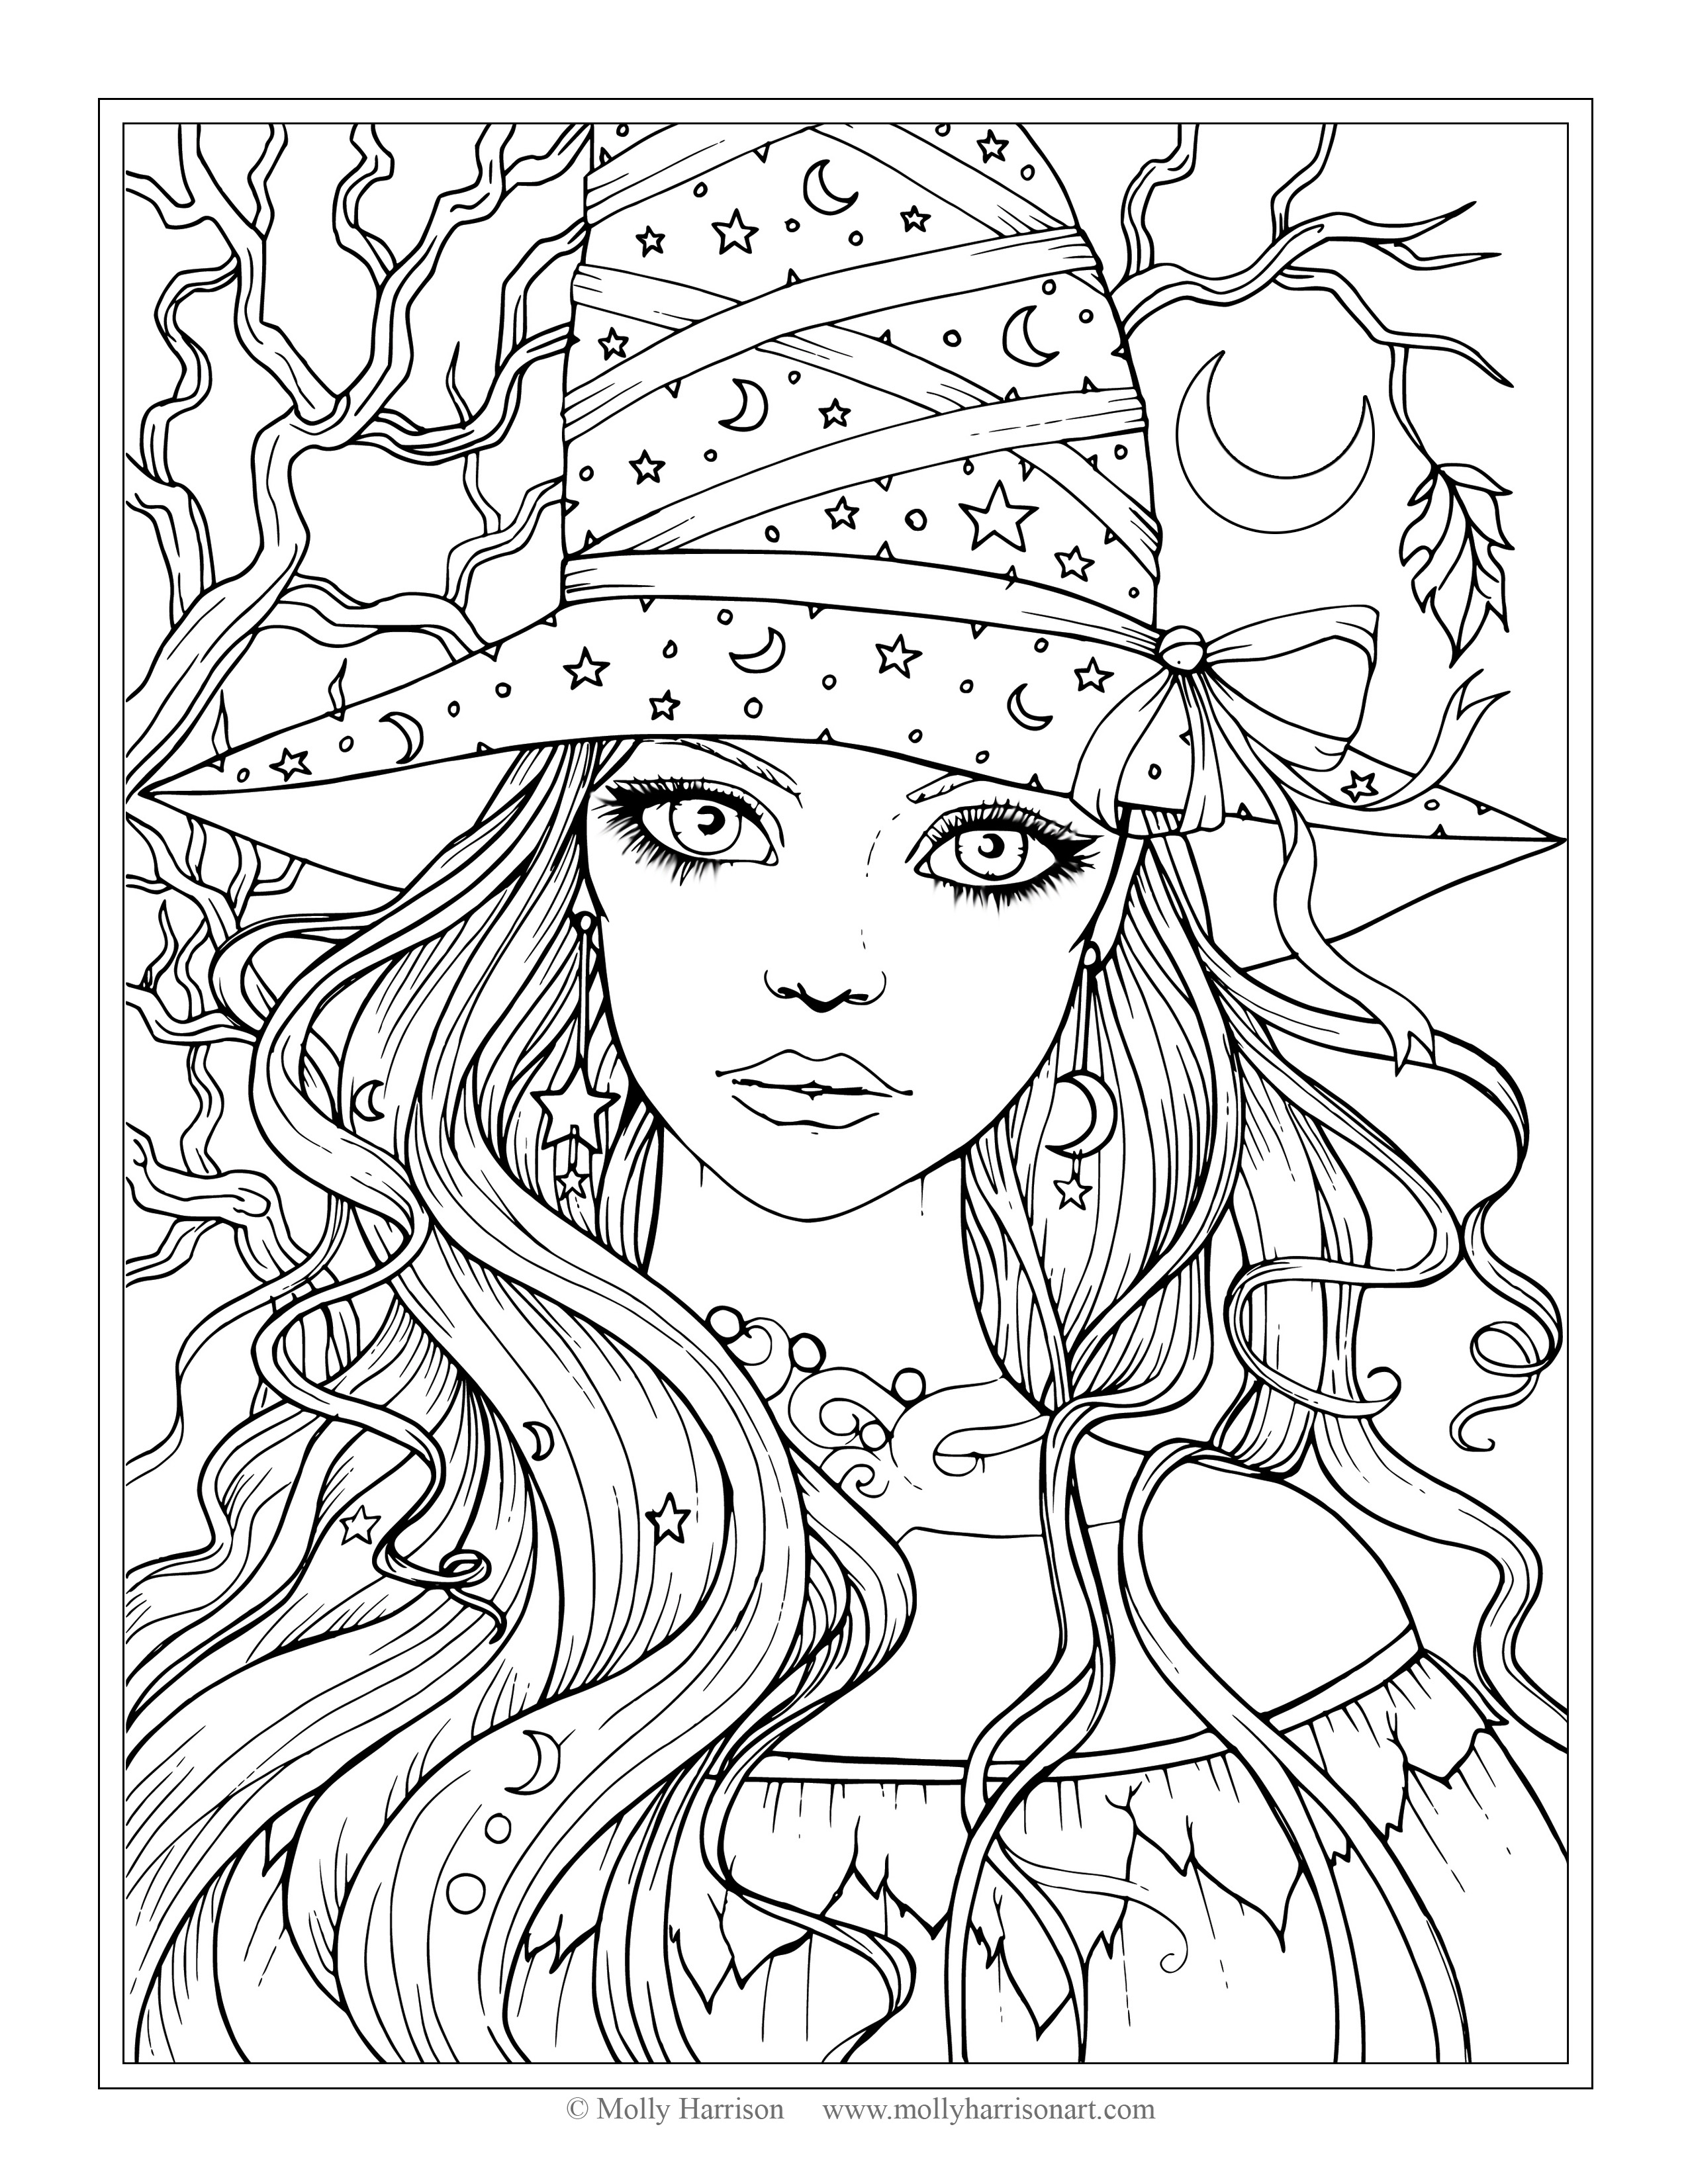 Witch Face Coloring Pages at GetDrawings Free download